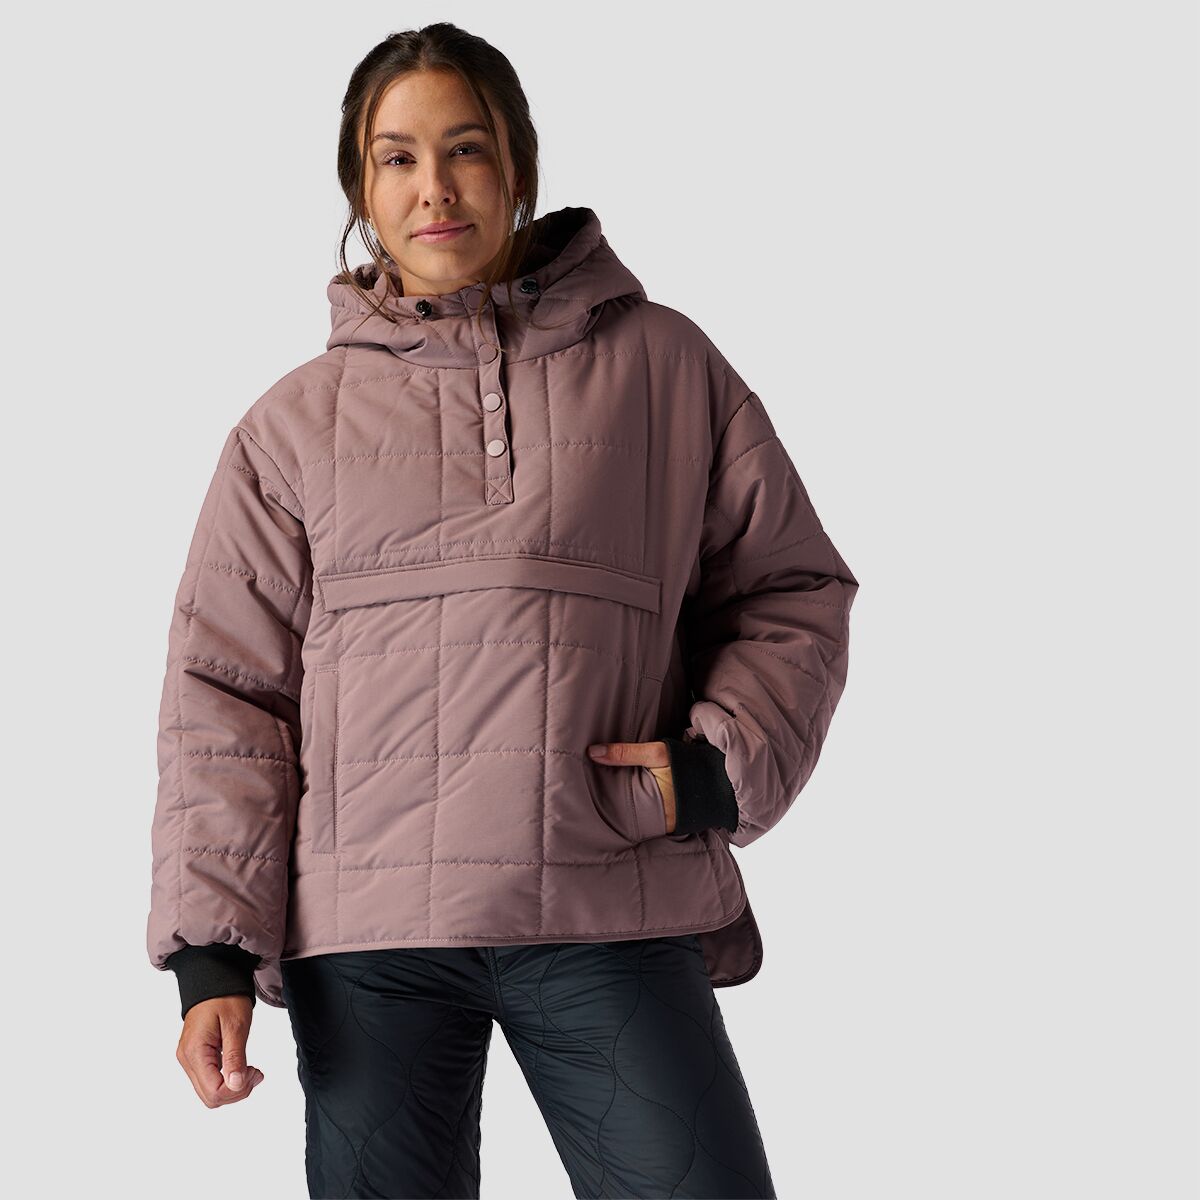 Stoic Quilted 1/2 Snap Pullover - Women's